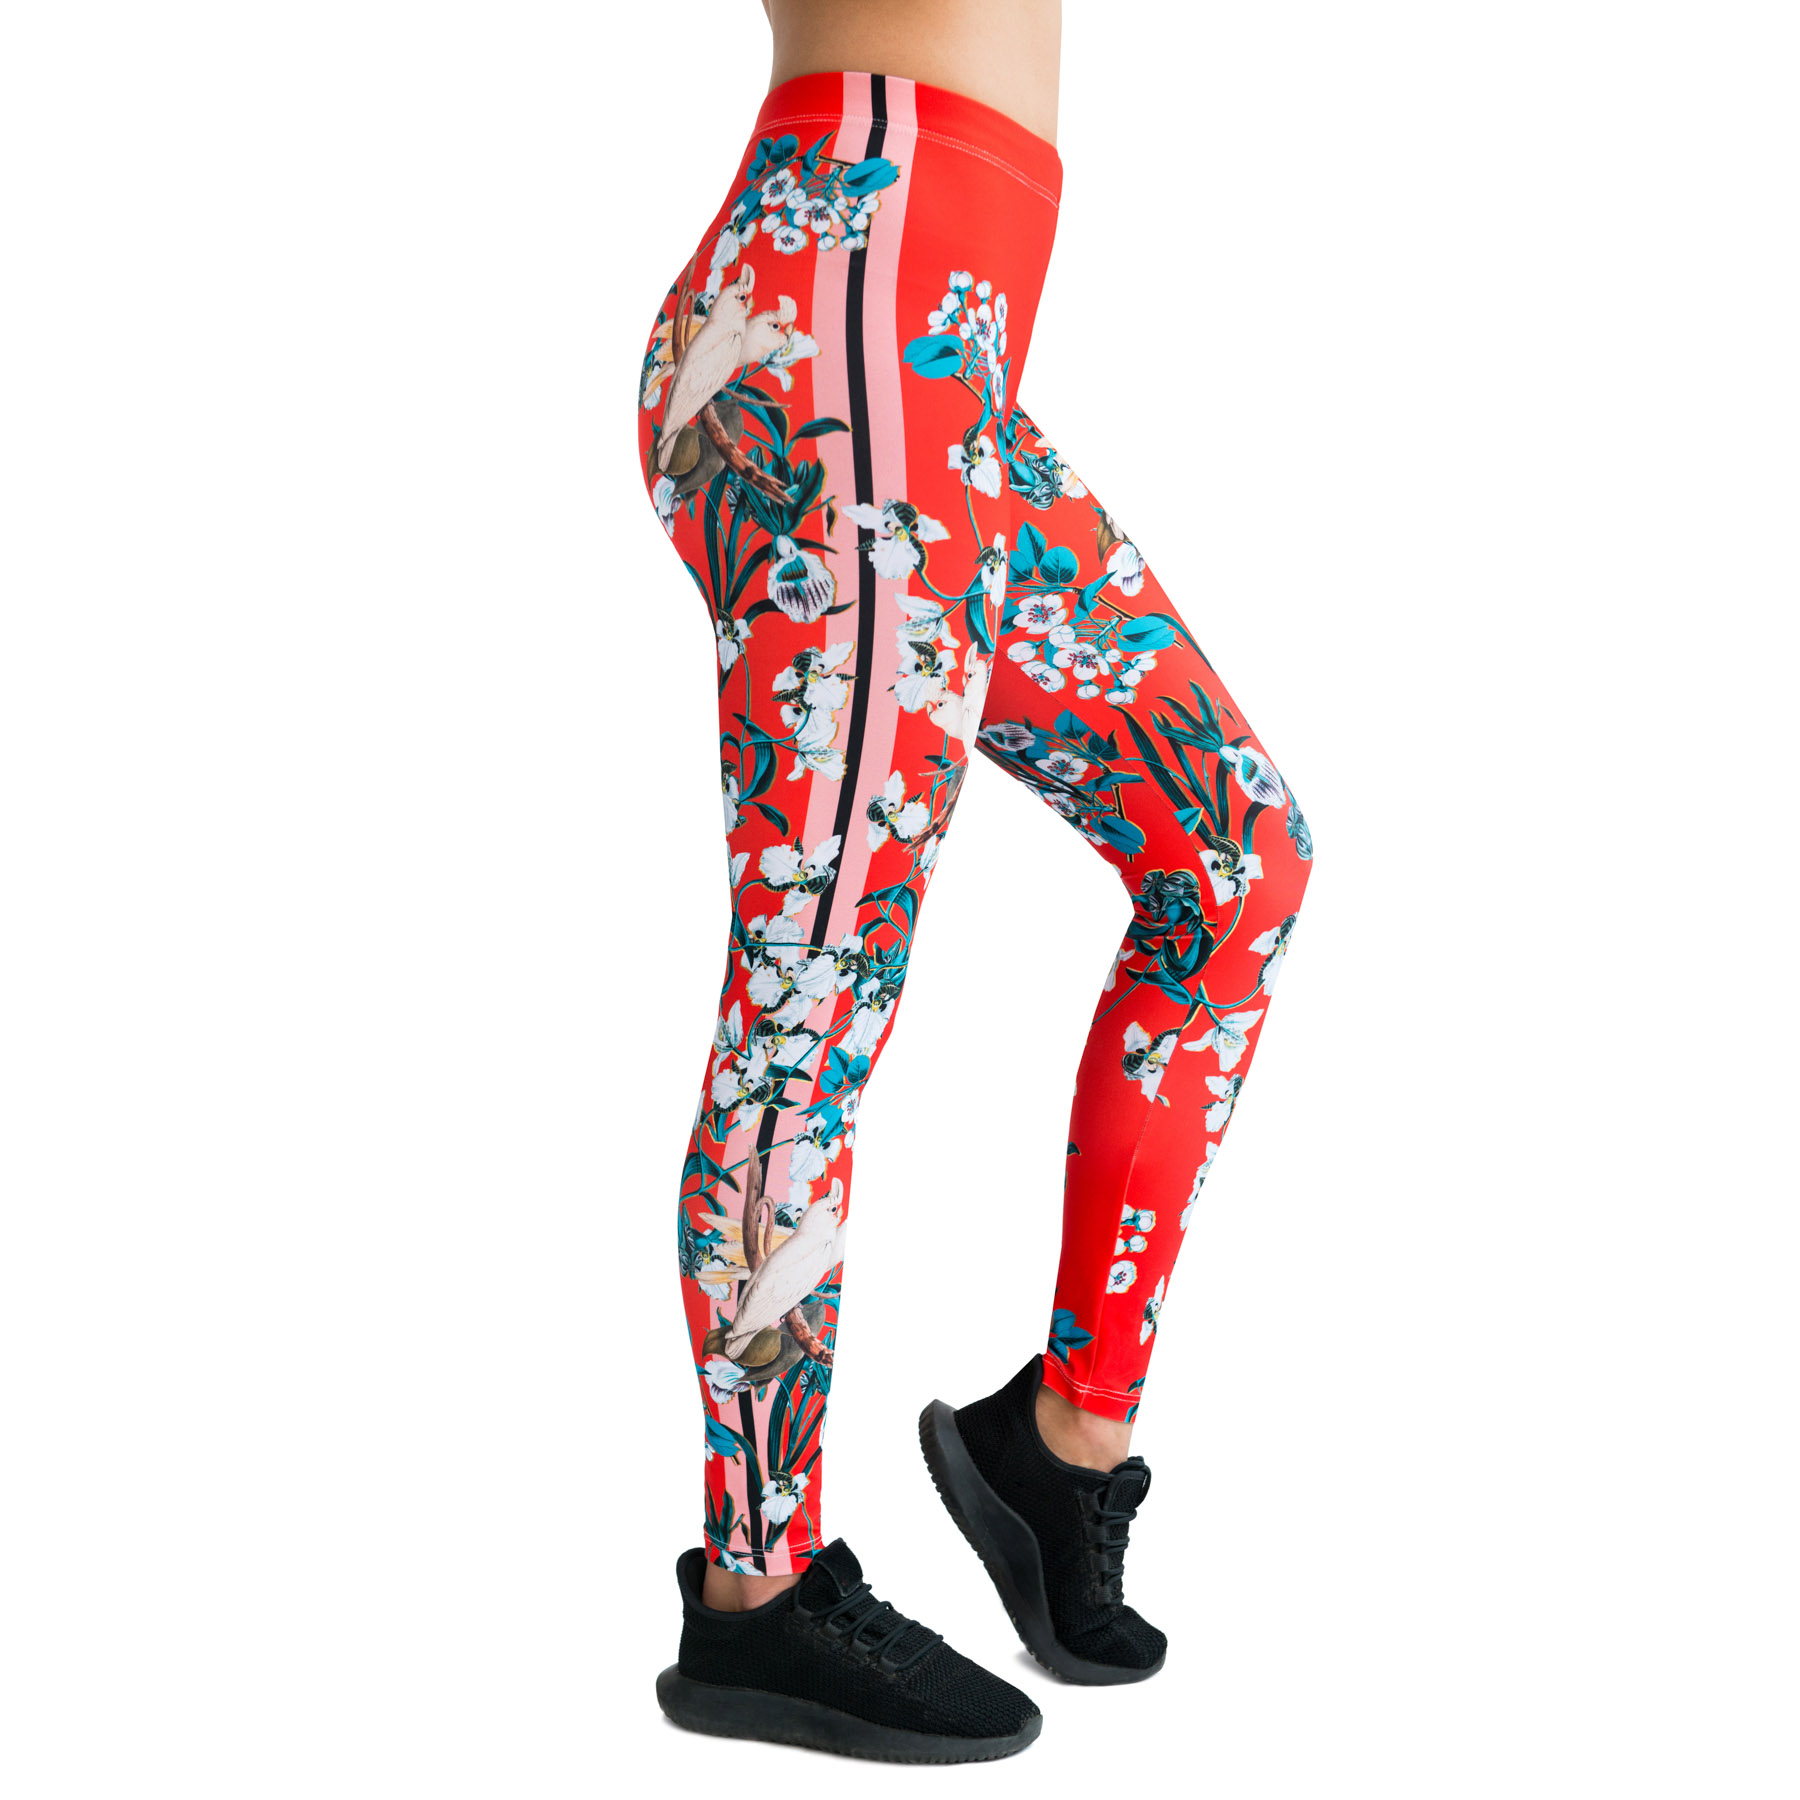 Red Lovebirds legginsy with flowers Cacofonia